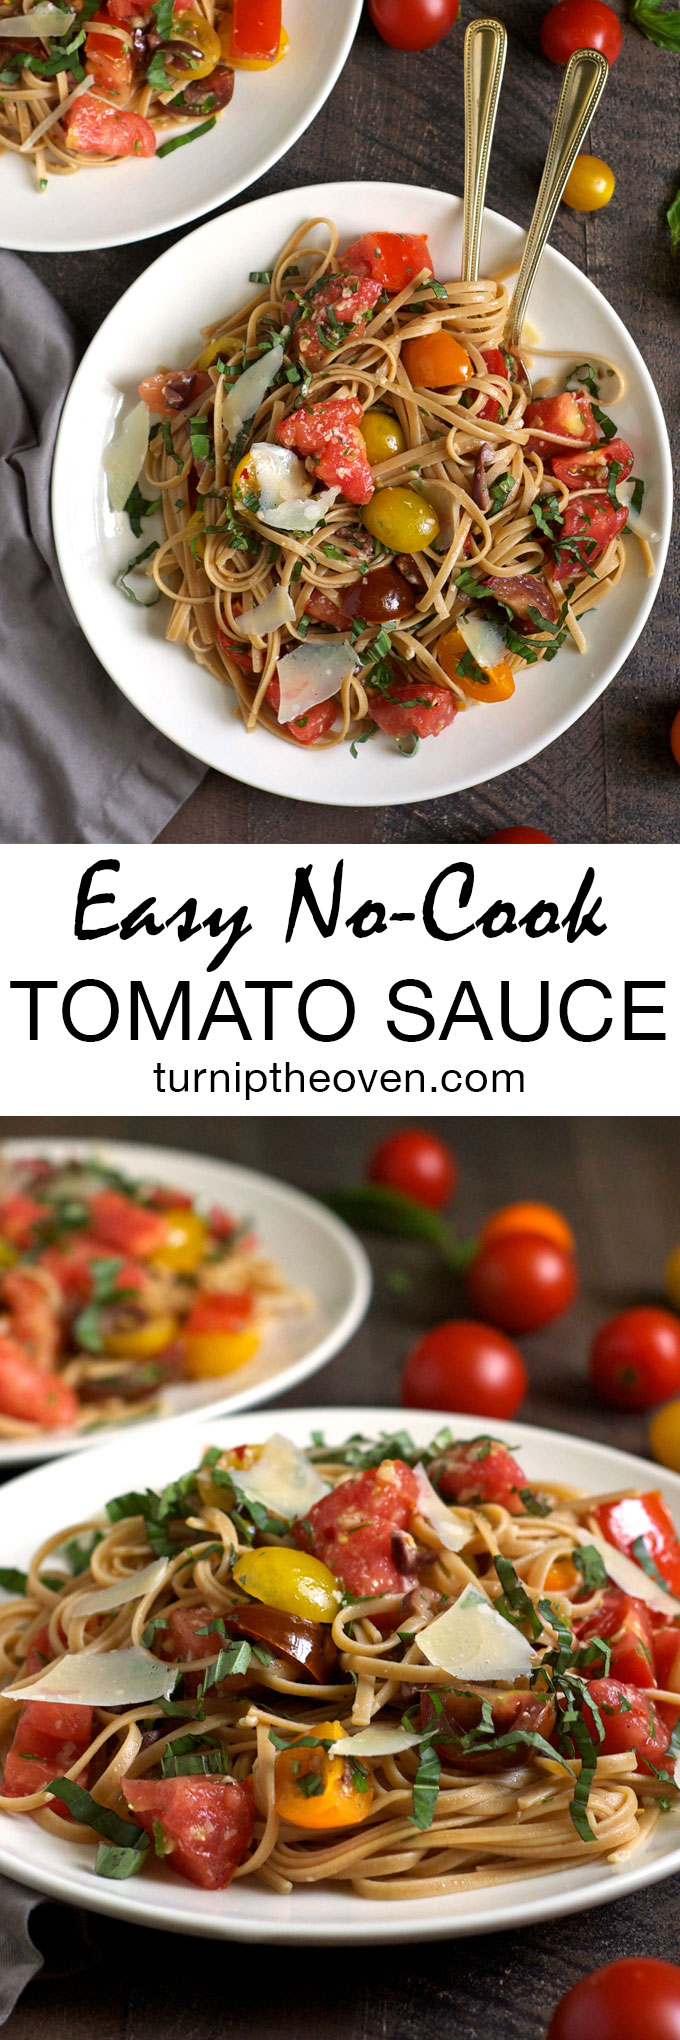 This easy, healthy, no-cook tomato sauce makes the perfect summer meal when tossed with pasta. Juicy ripe tomatoes, garlic, basil, and tons of Parmesan cheese. So simple you can whip it up in 10 minutes flat!